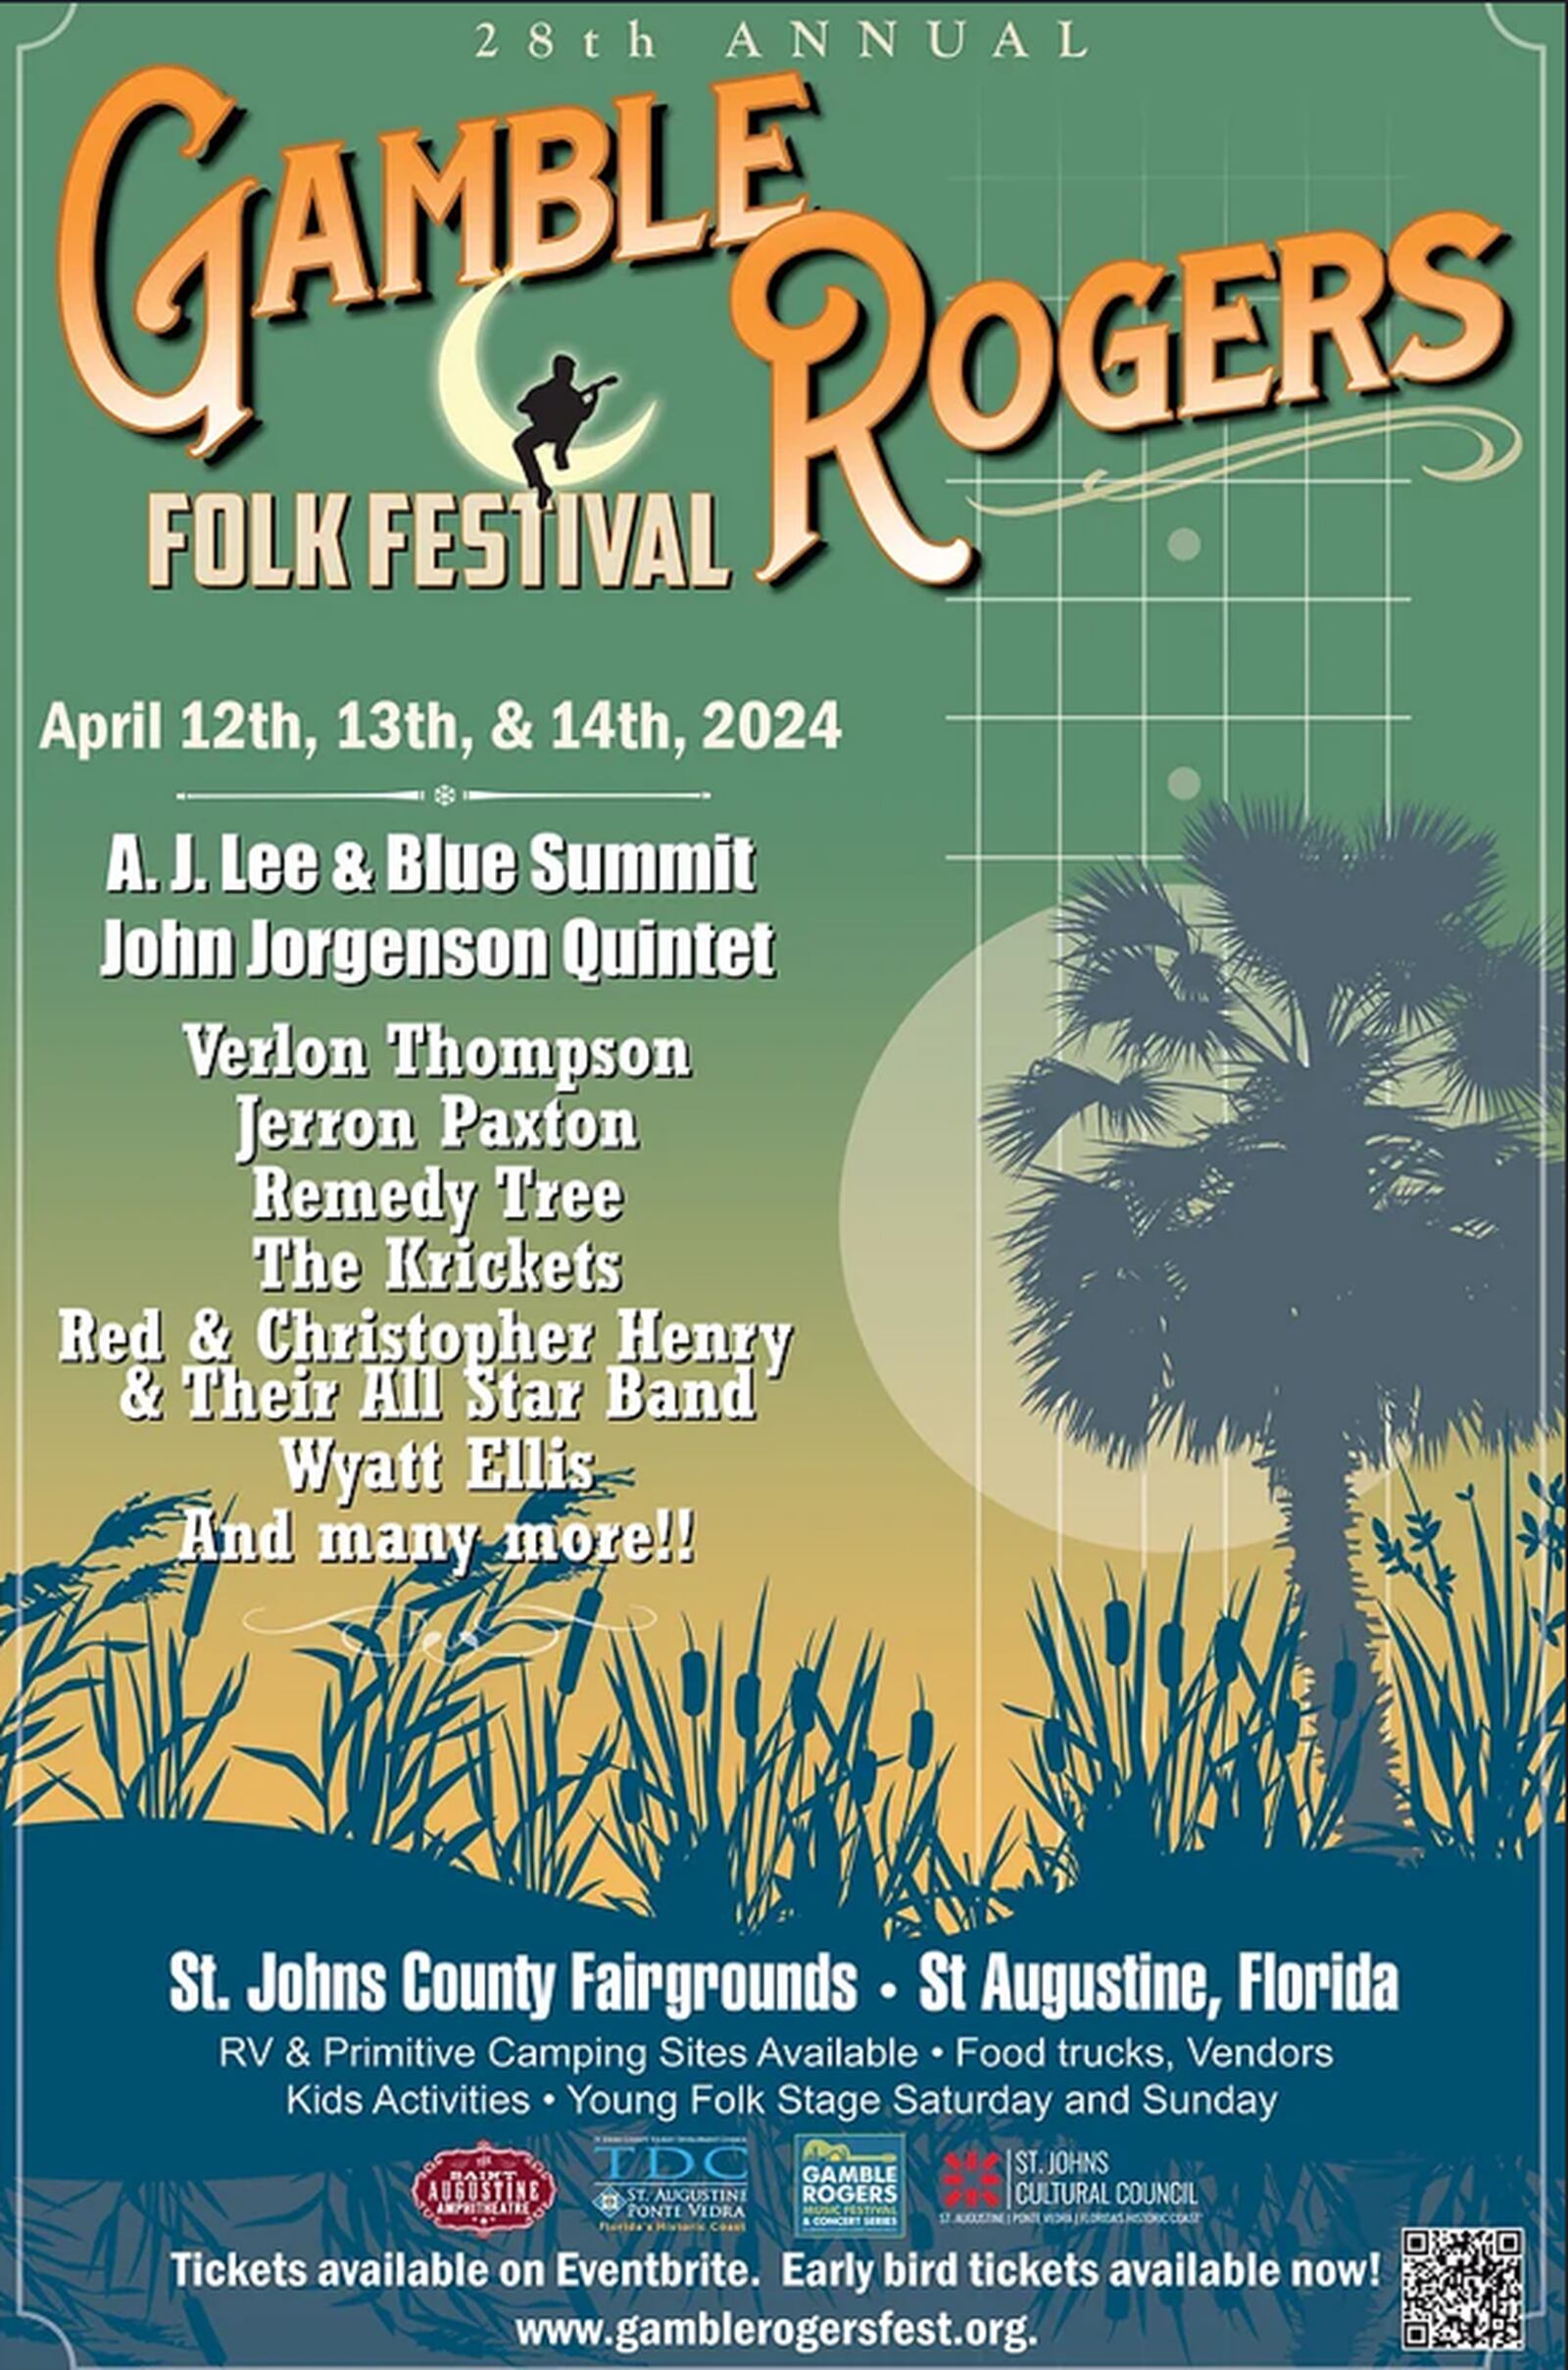 Early bird ticket sales for the Gamble Rogers Folk Festival Action